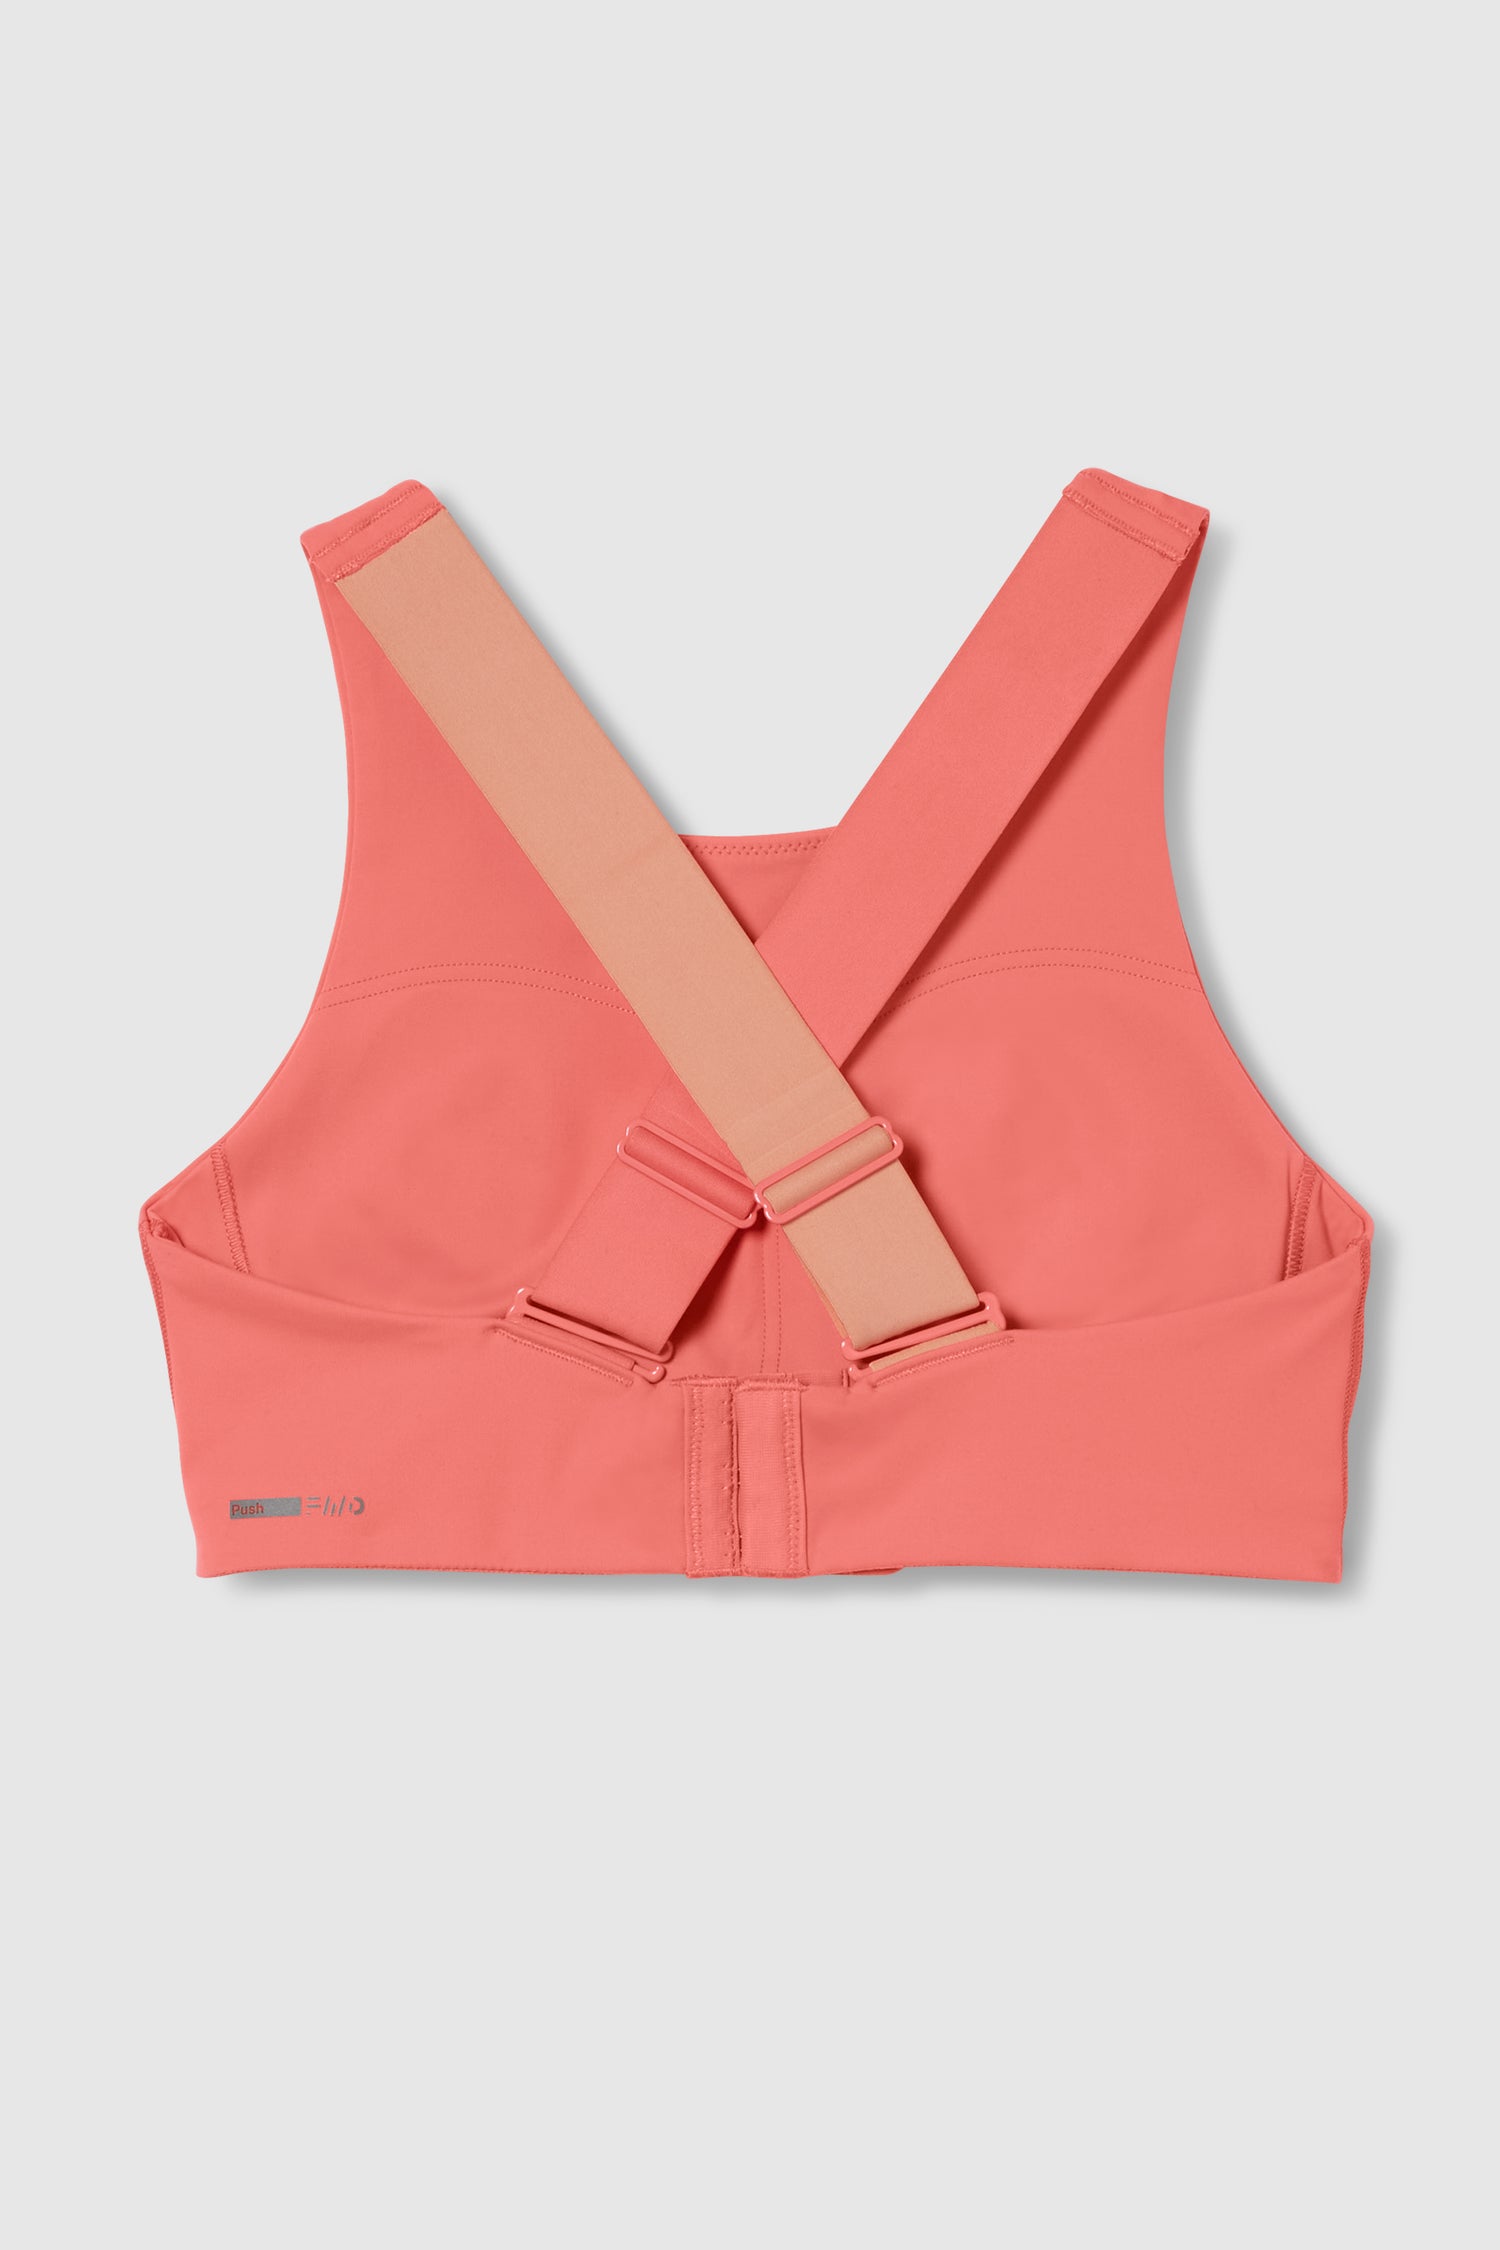 Avia Pink Athletic Hoodies for Women